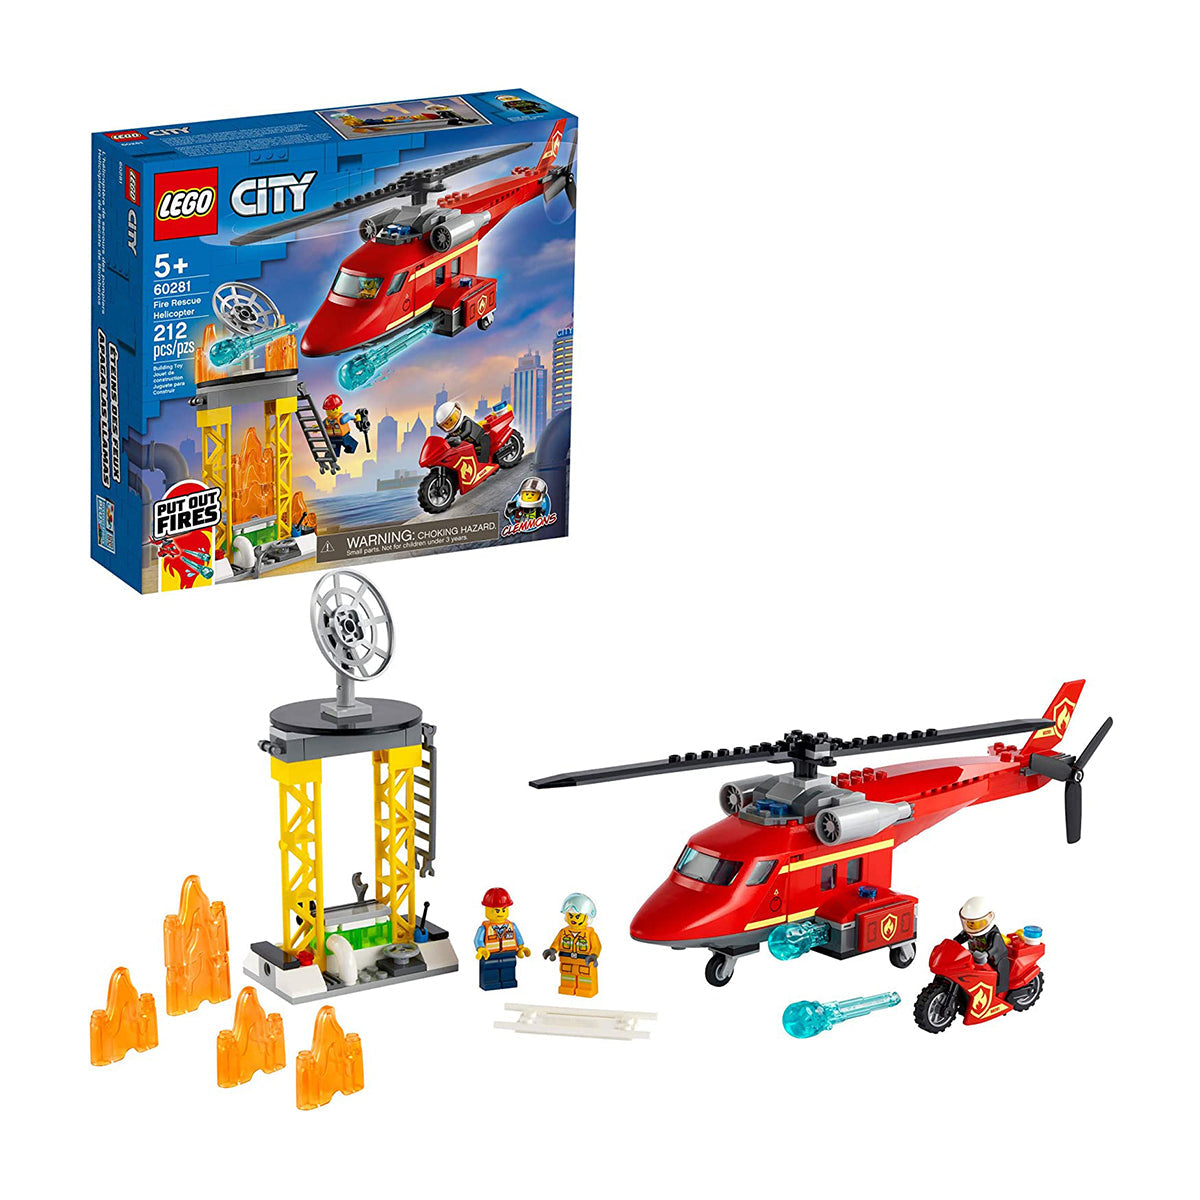 LEGO City - Fire Rescue Helicopter 60281